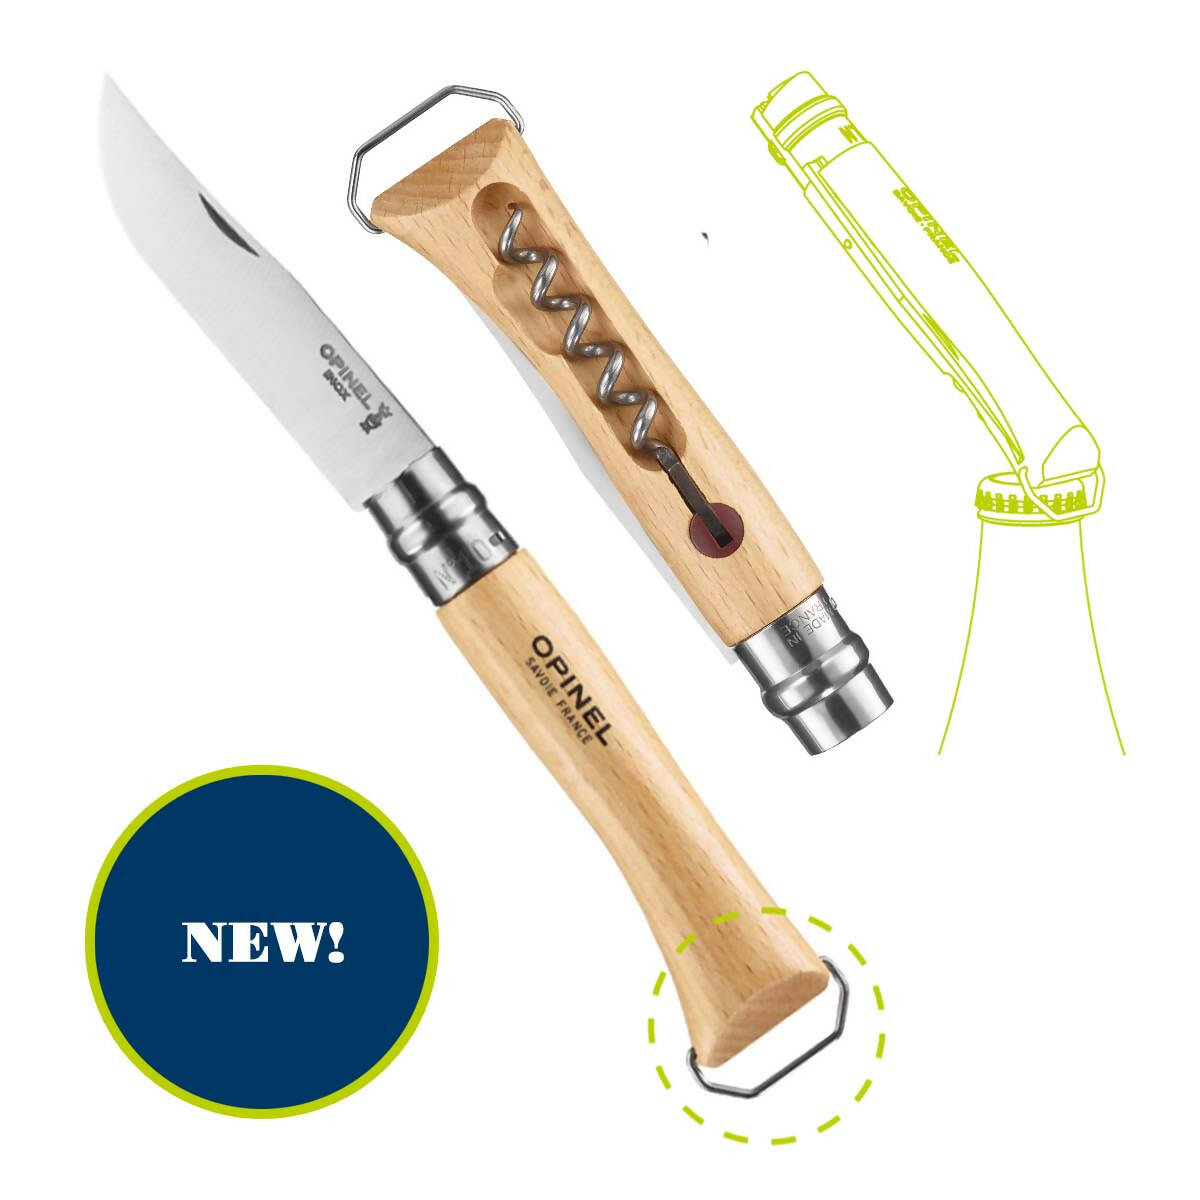 Opinel - No.10 Corkscrew Stainless Steel Folding Knife with Bottle Opener